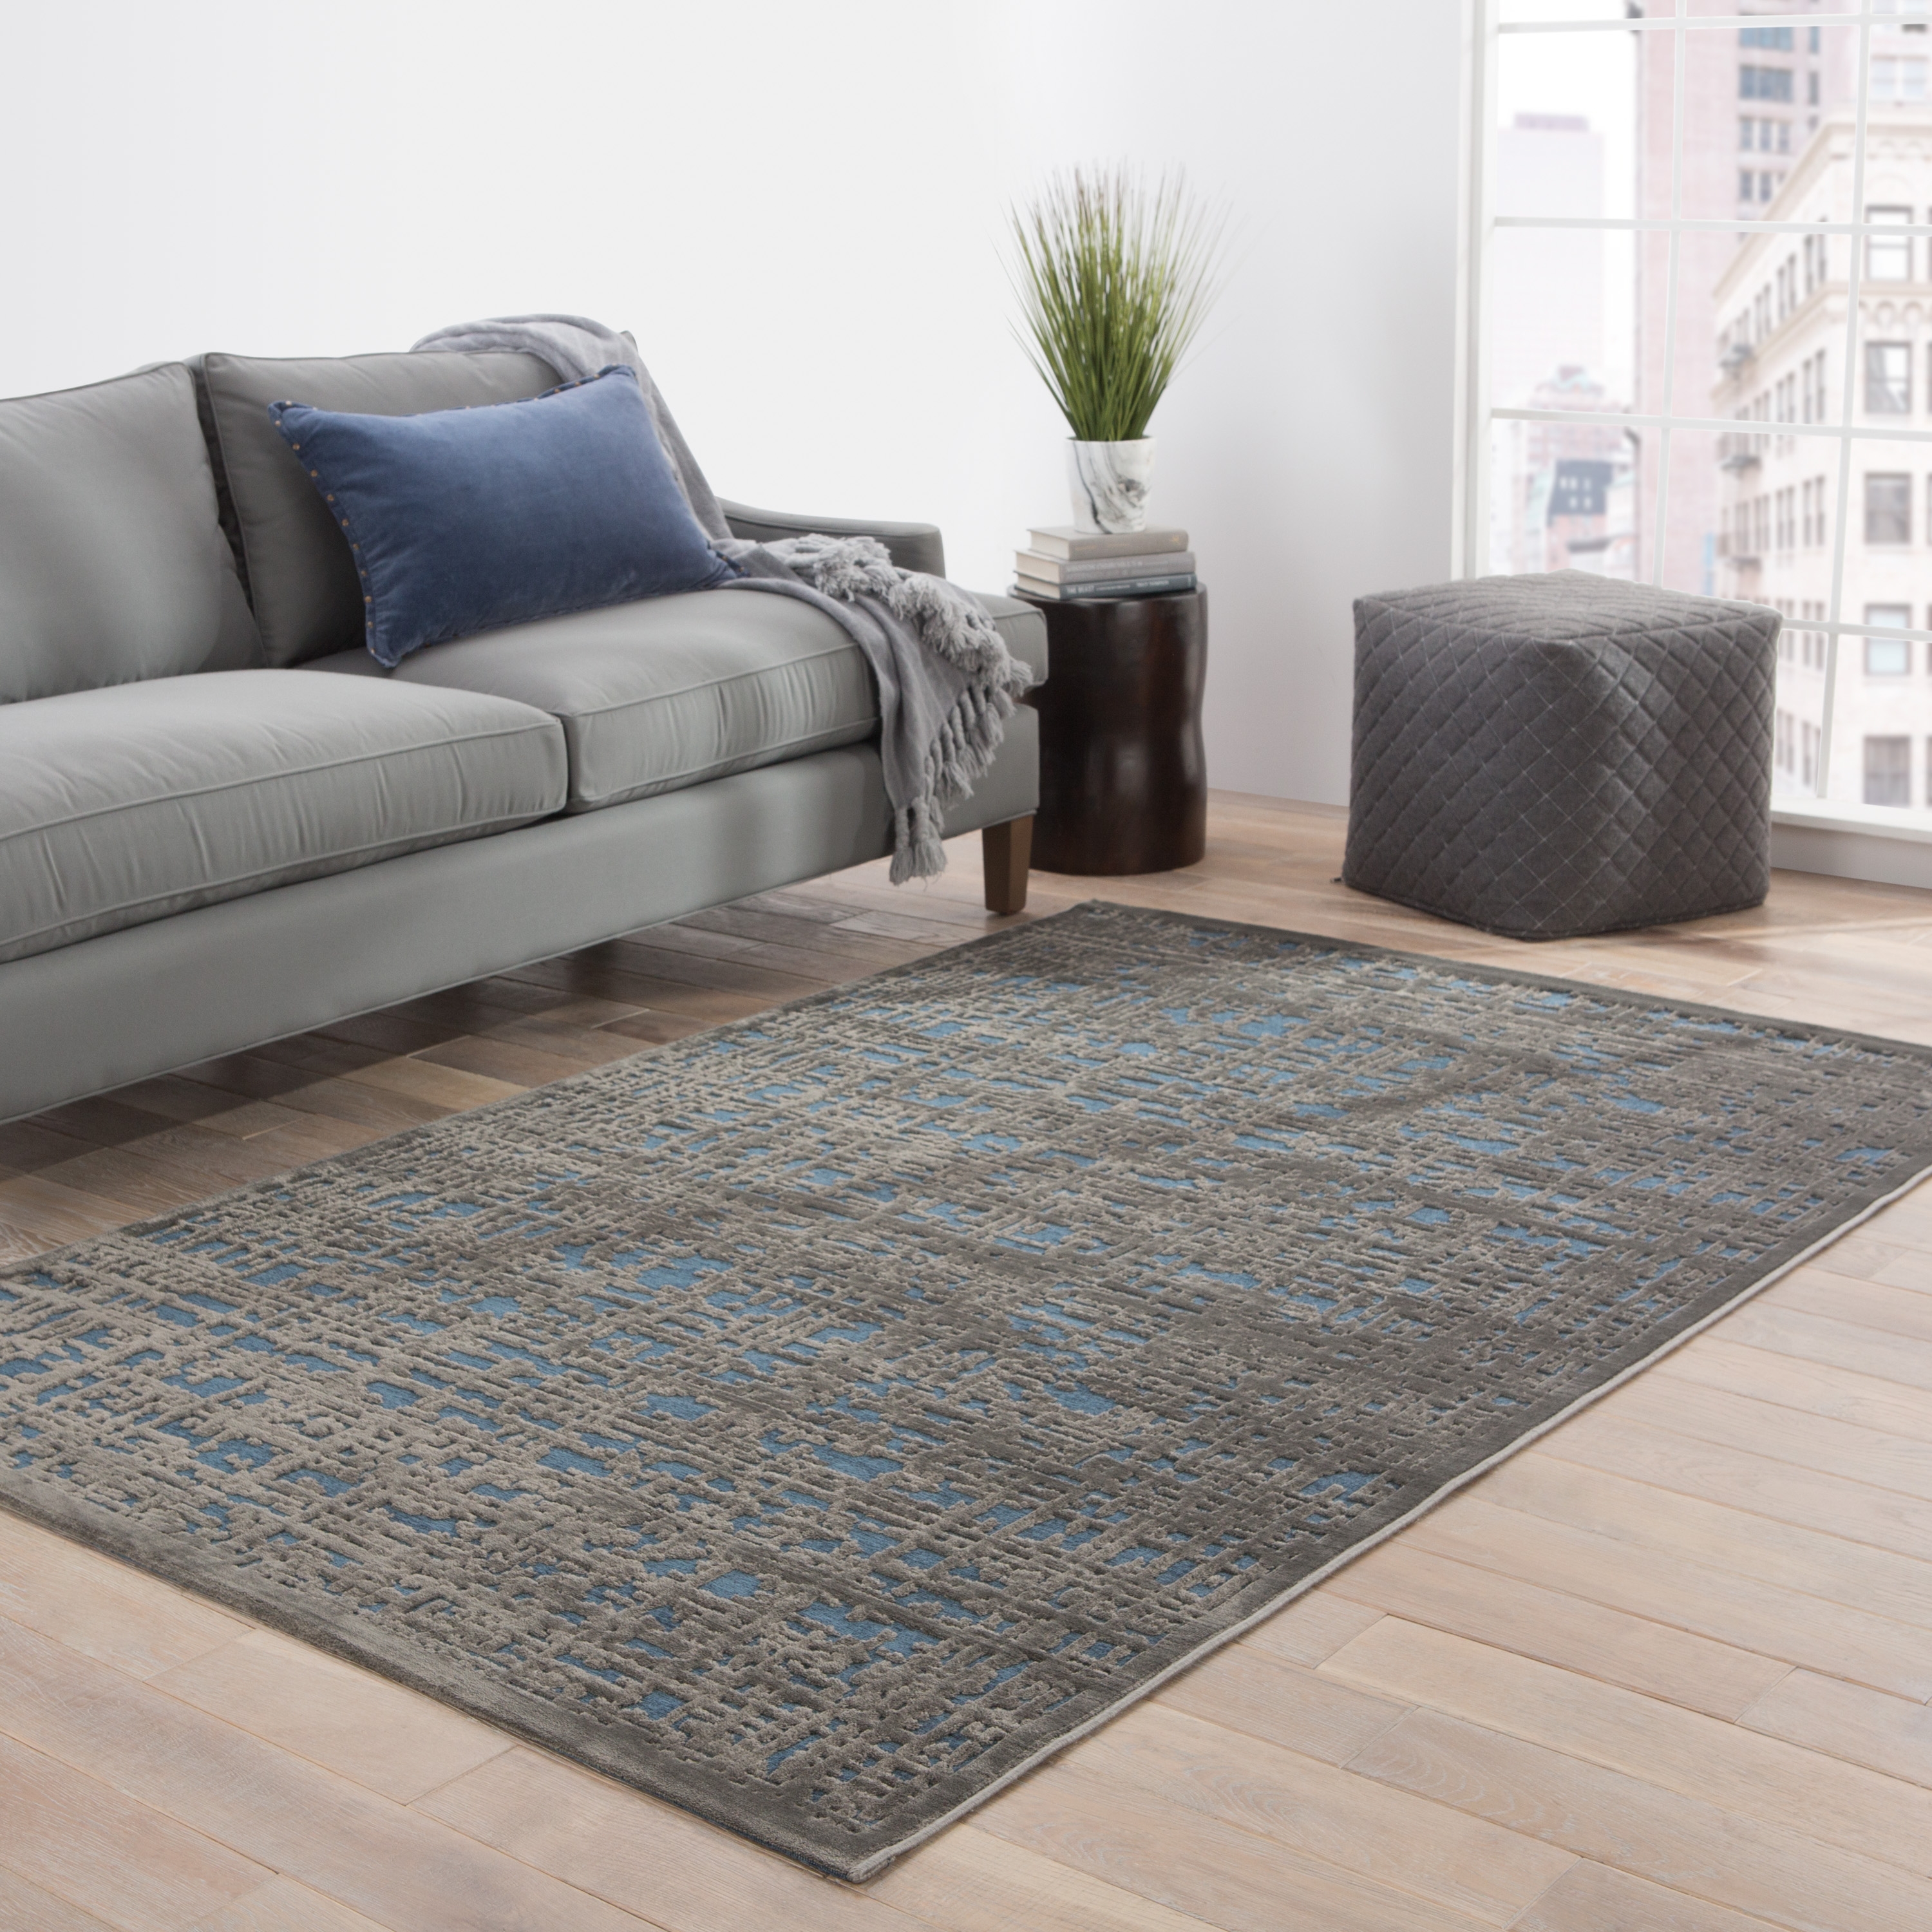 Dreamy Abstract Gray/ Blue Area Rug (7'6" X 9'6") - Image 4